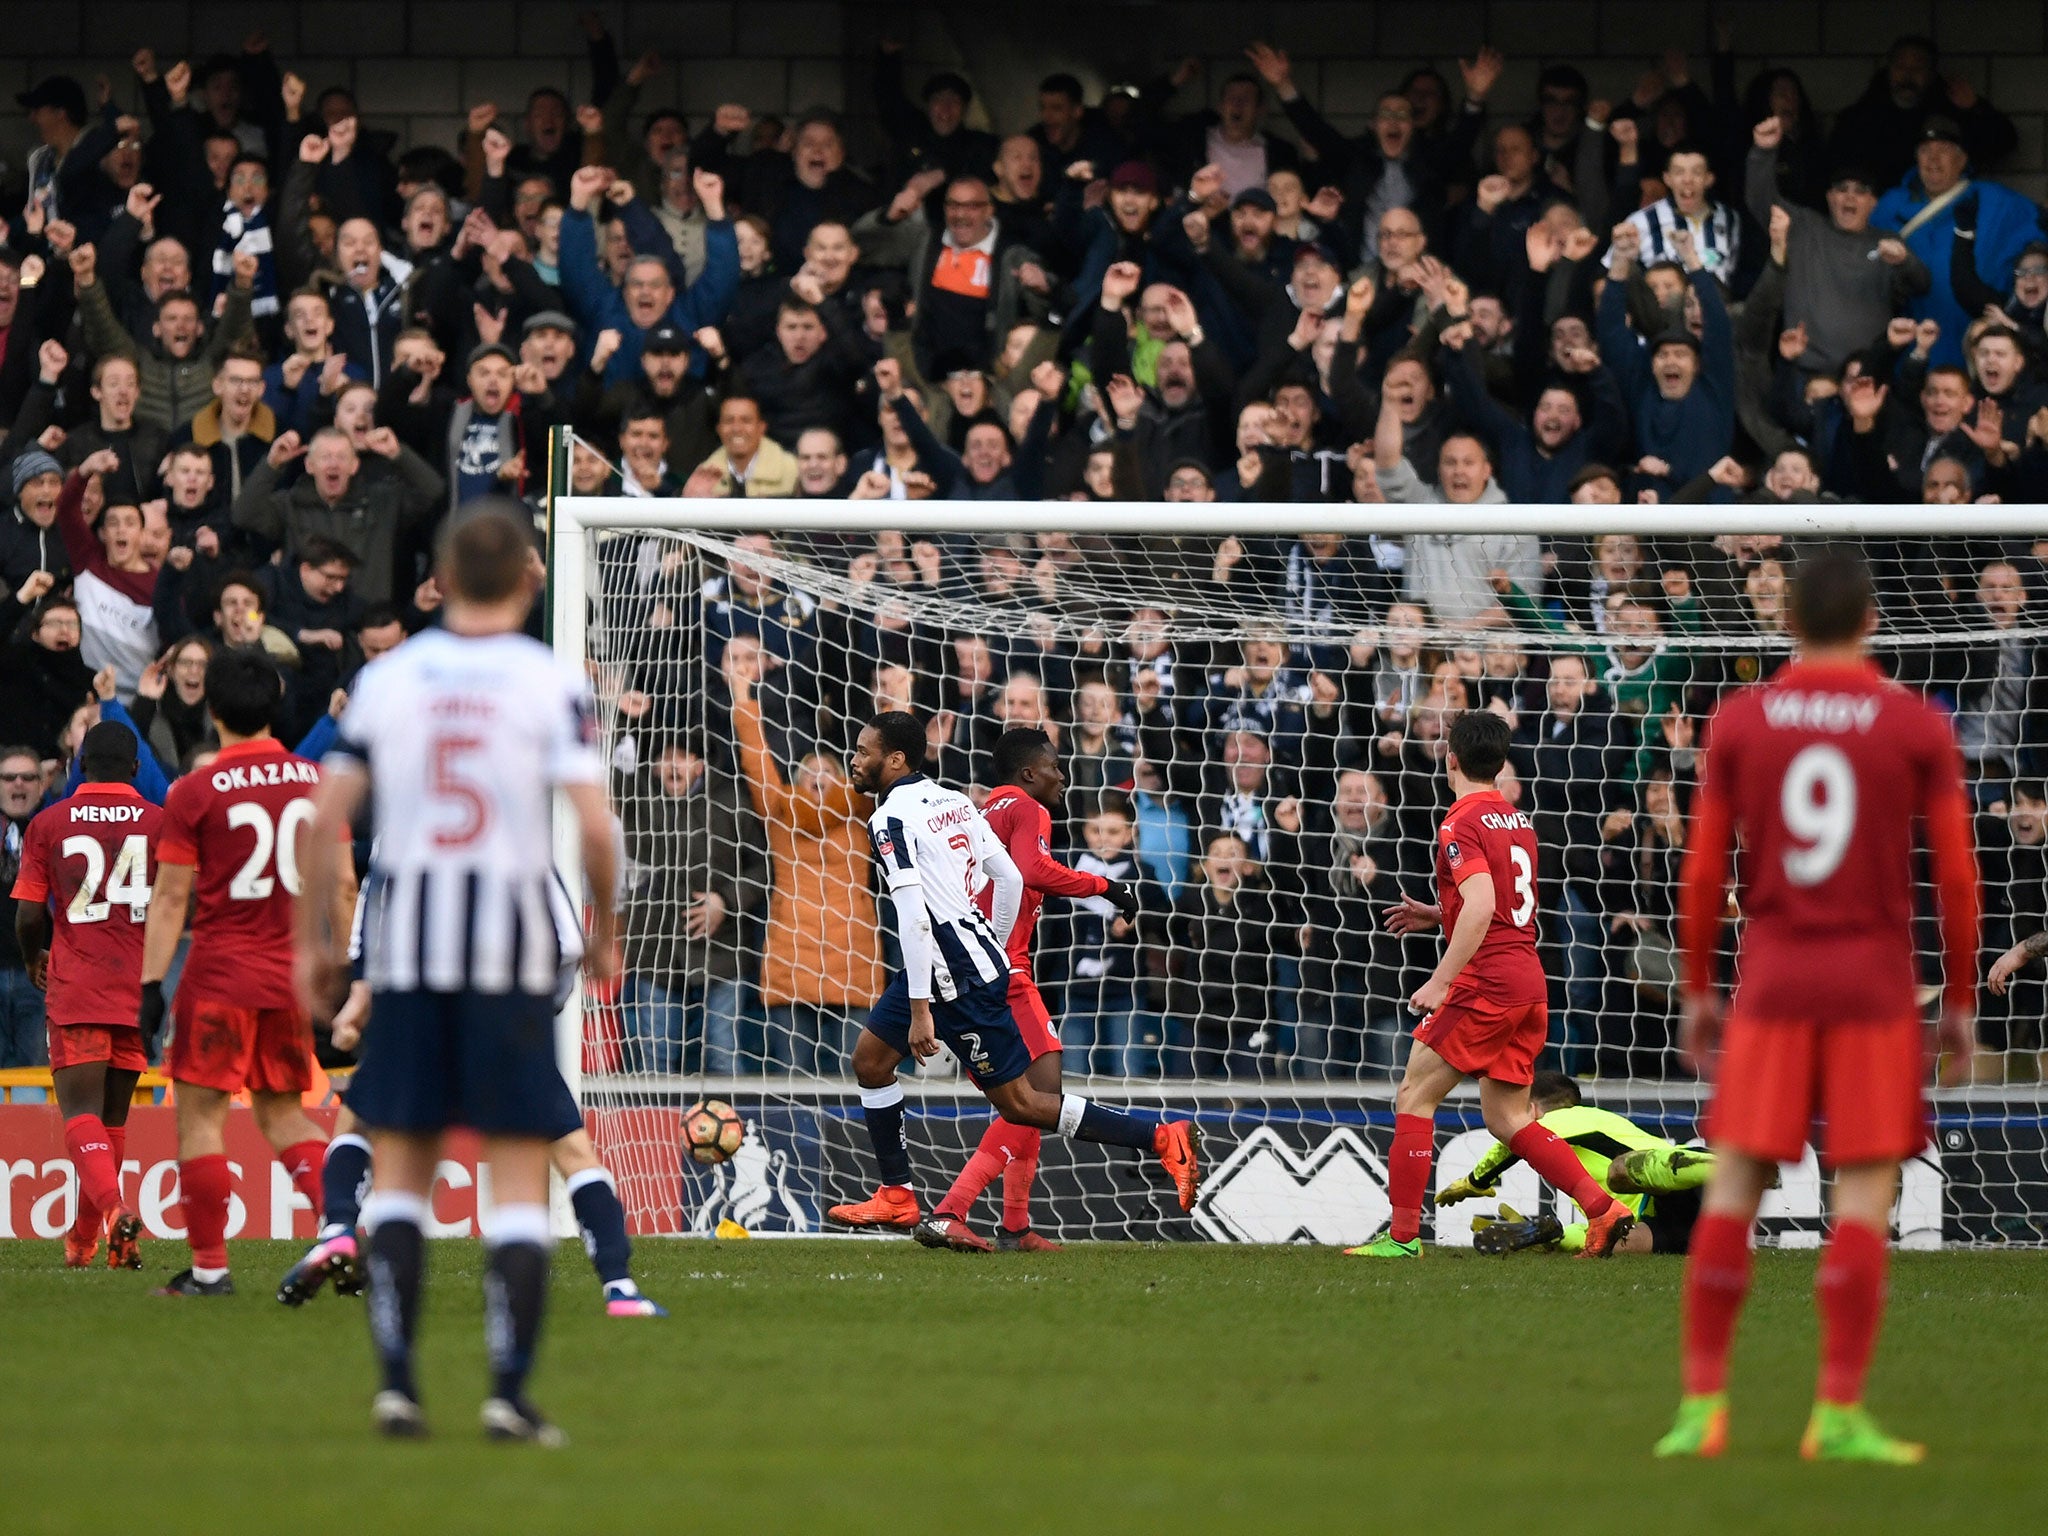 Shaun Cummings' injury-time goal was enough to book Millwall a spot in the quarter-finals